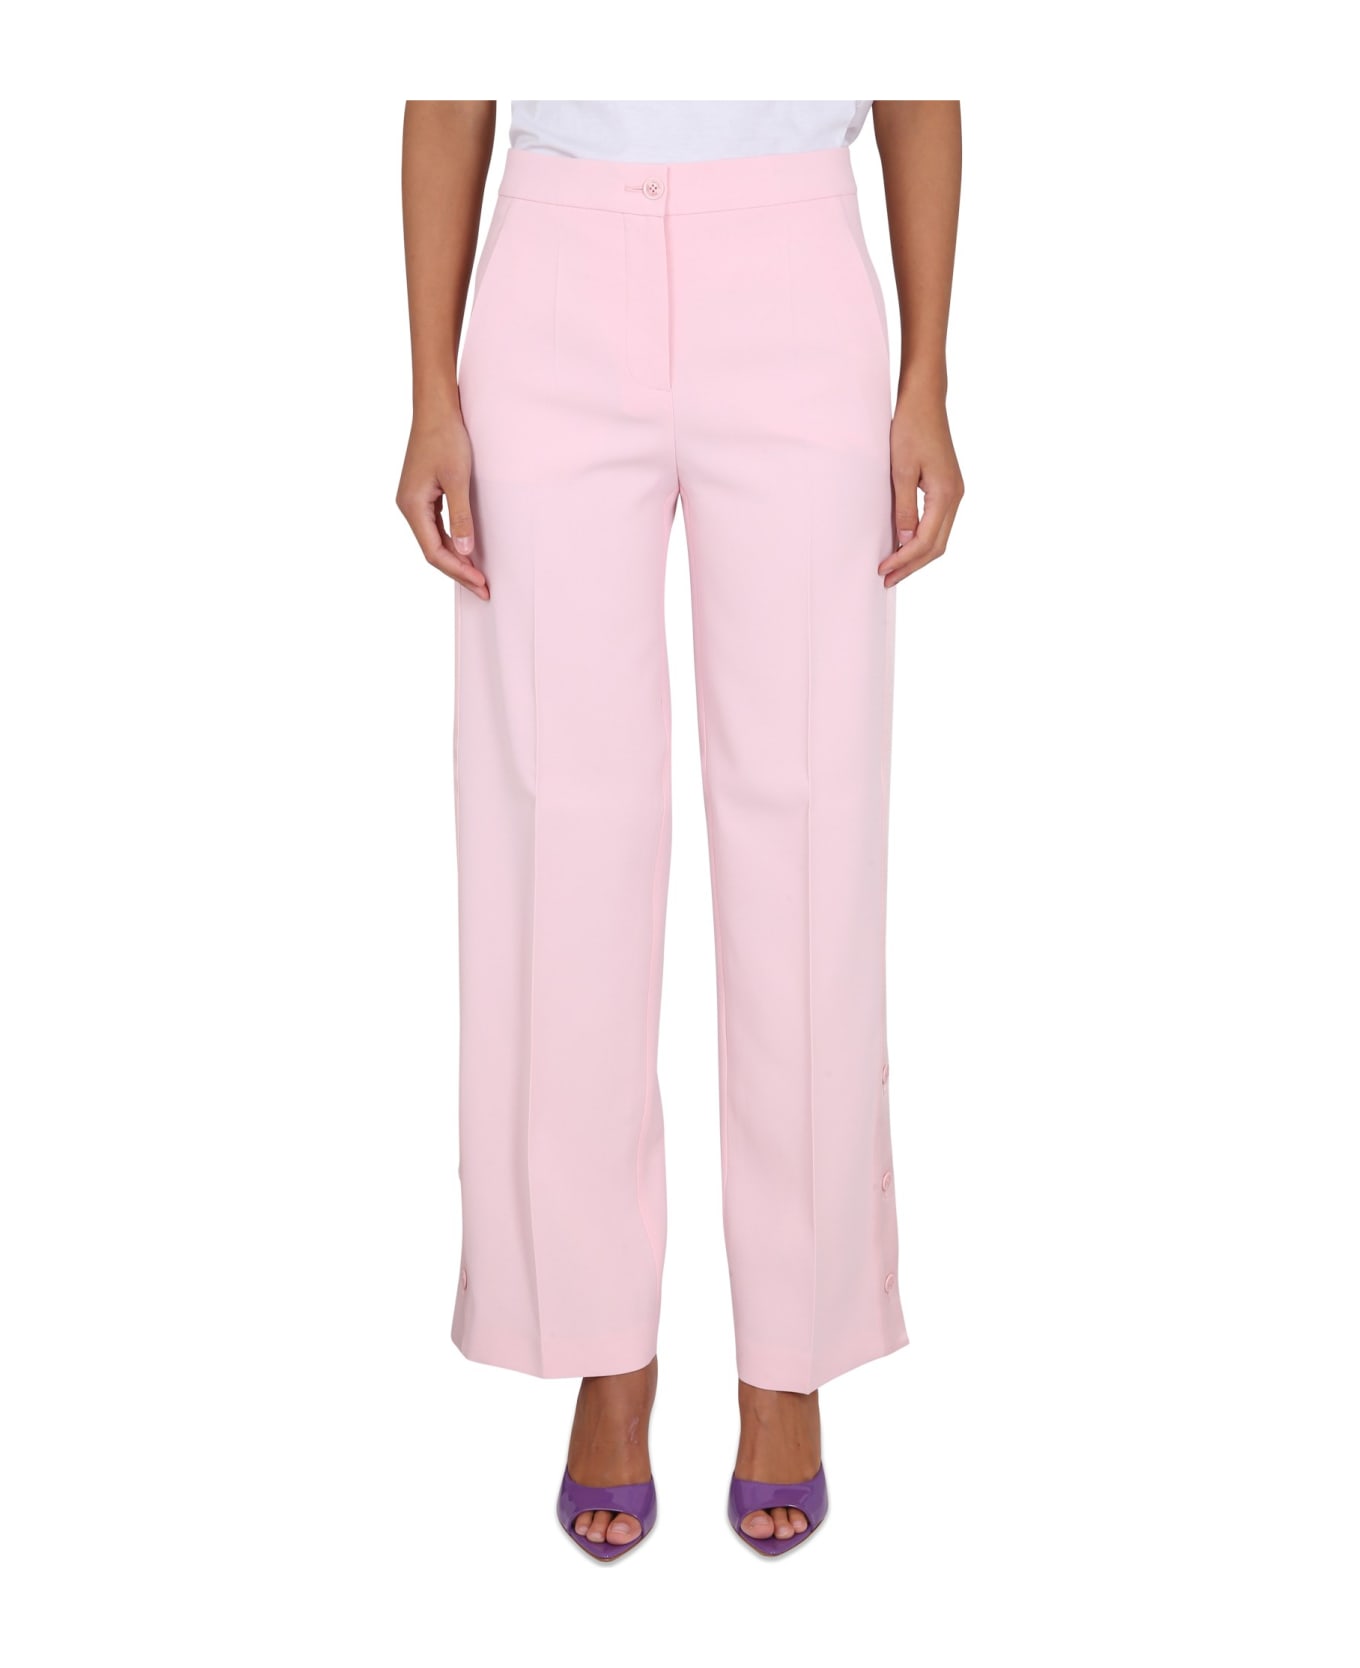 Boutique Moschino Pants With Buttons - ROSA